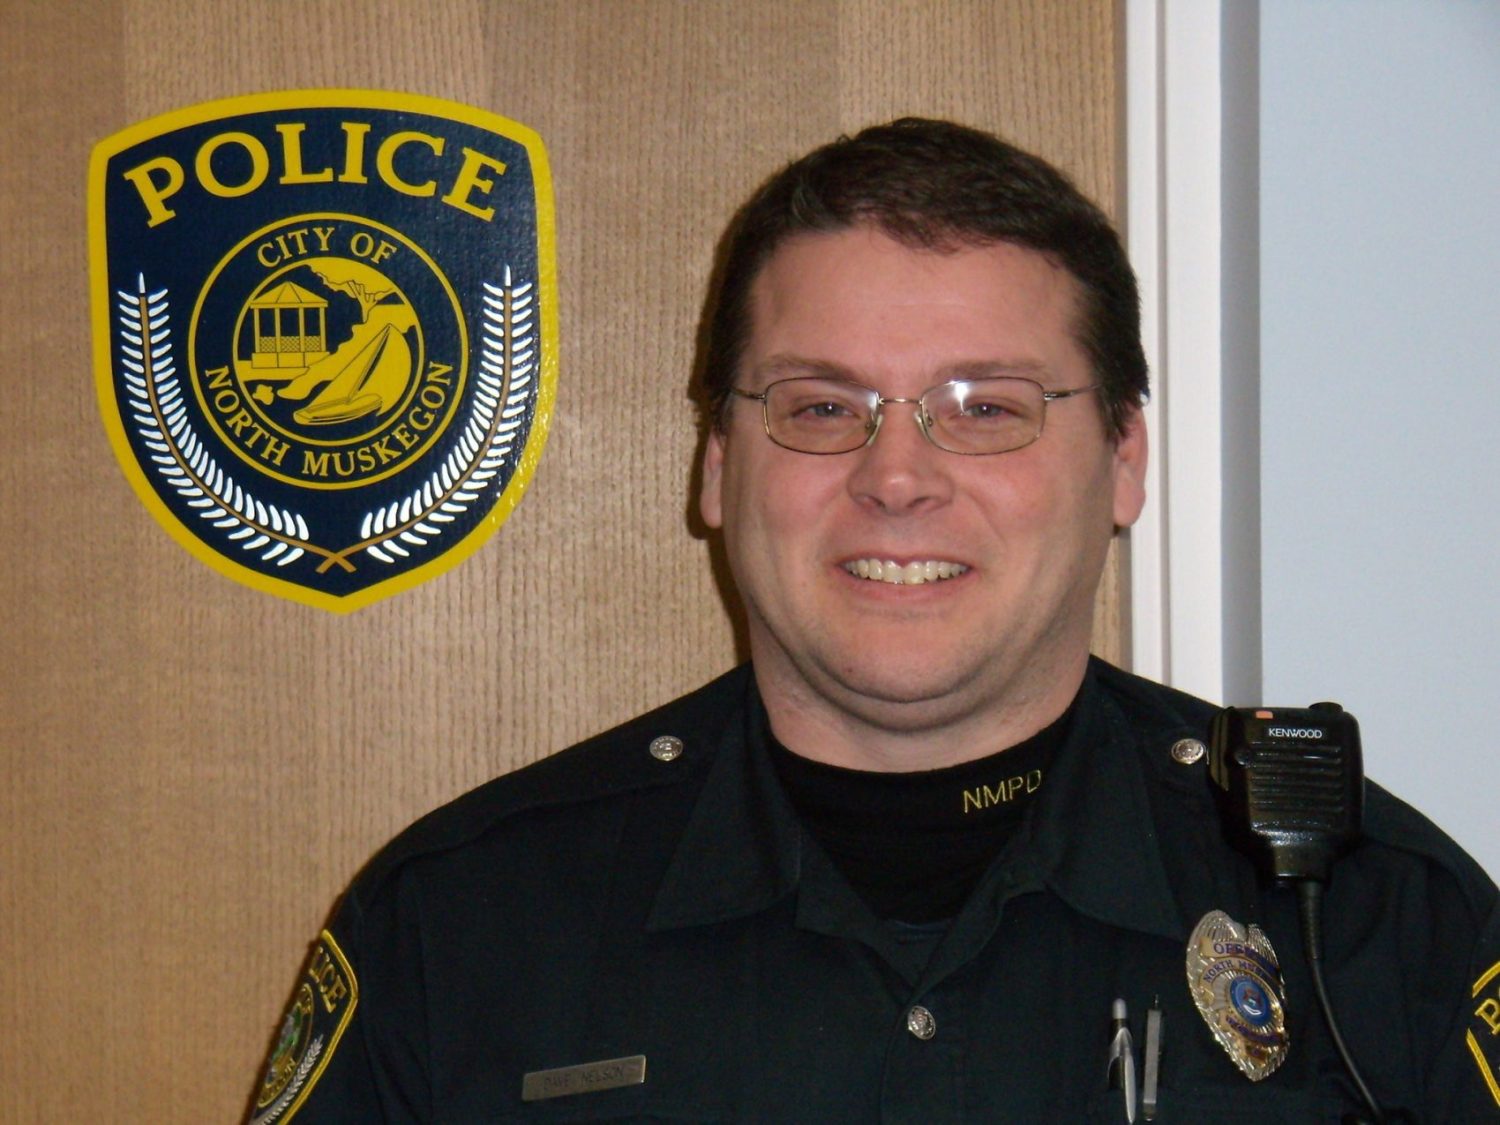 Officer Nelson has a wide scope of influence in his job and in coaching